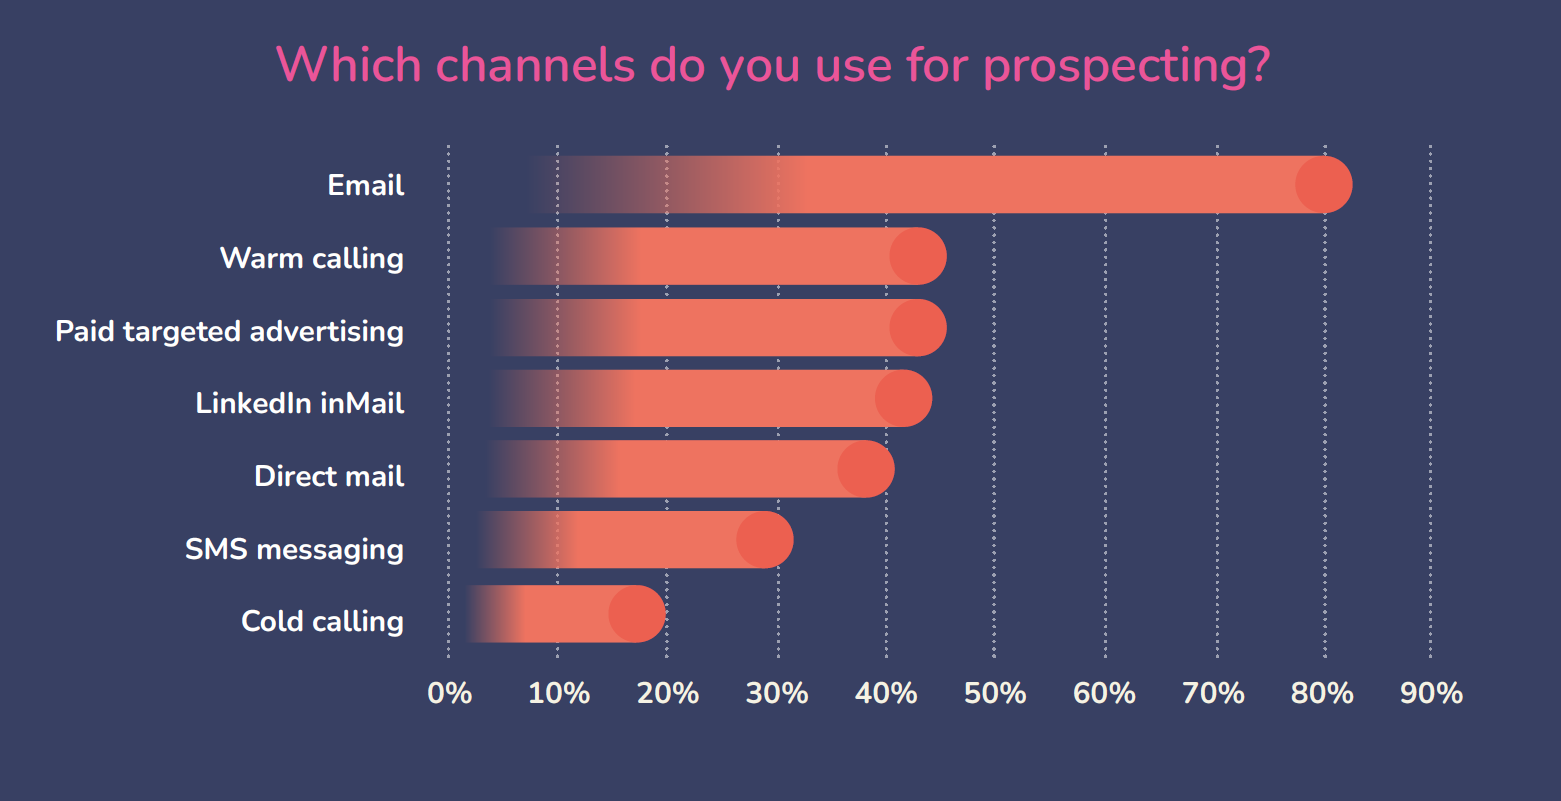 A chart showing which channels are used most for prospecting. Email is top with over 80%, then warm calling, paid ads, InMail, DMs, SMS, and finally cold calling has 20%.